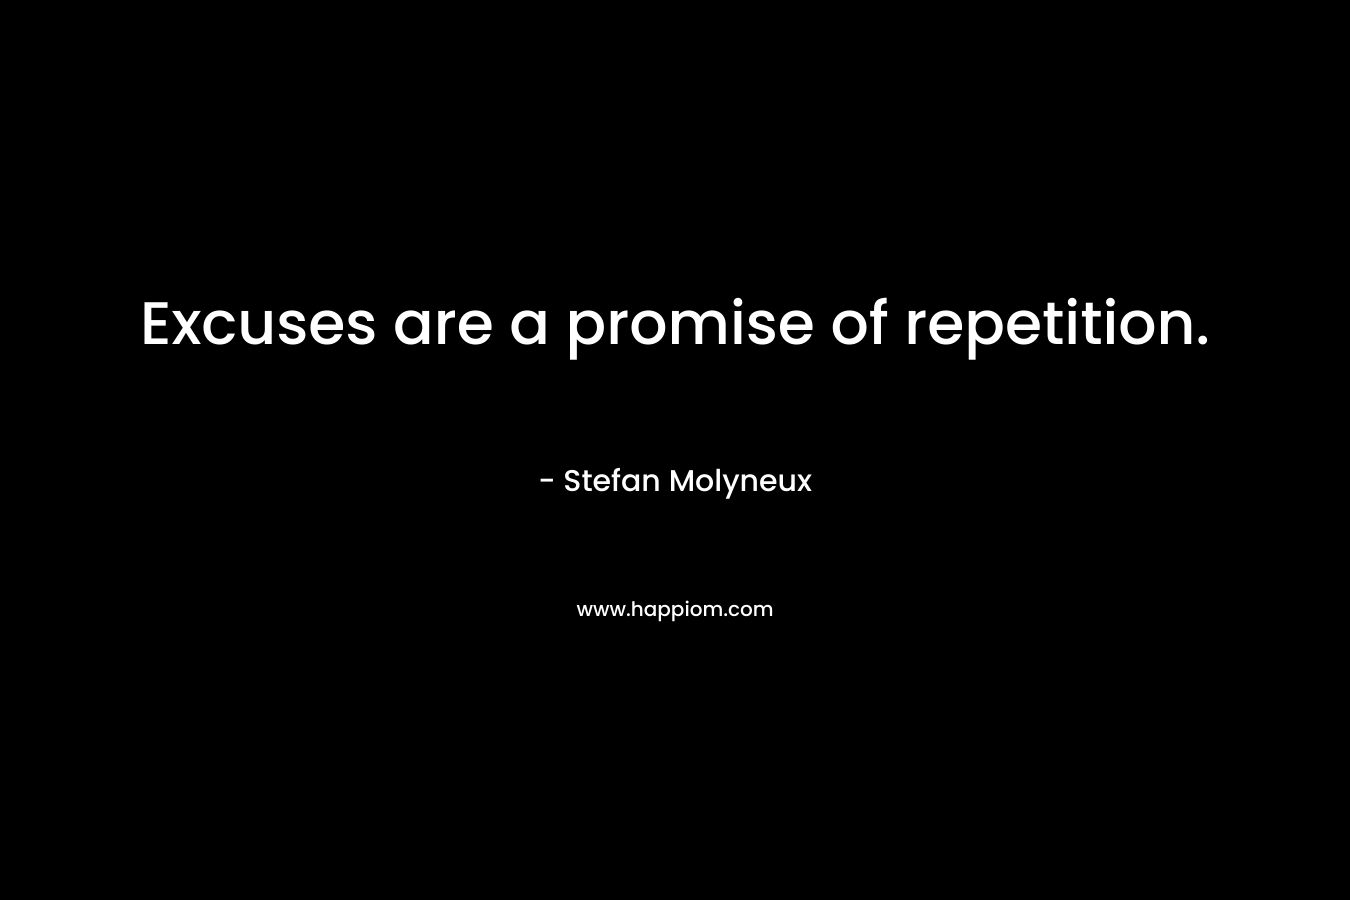 Excuses are a promise of repetition.